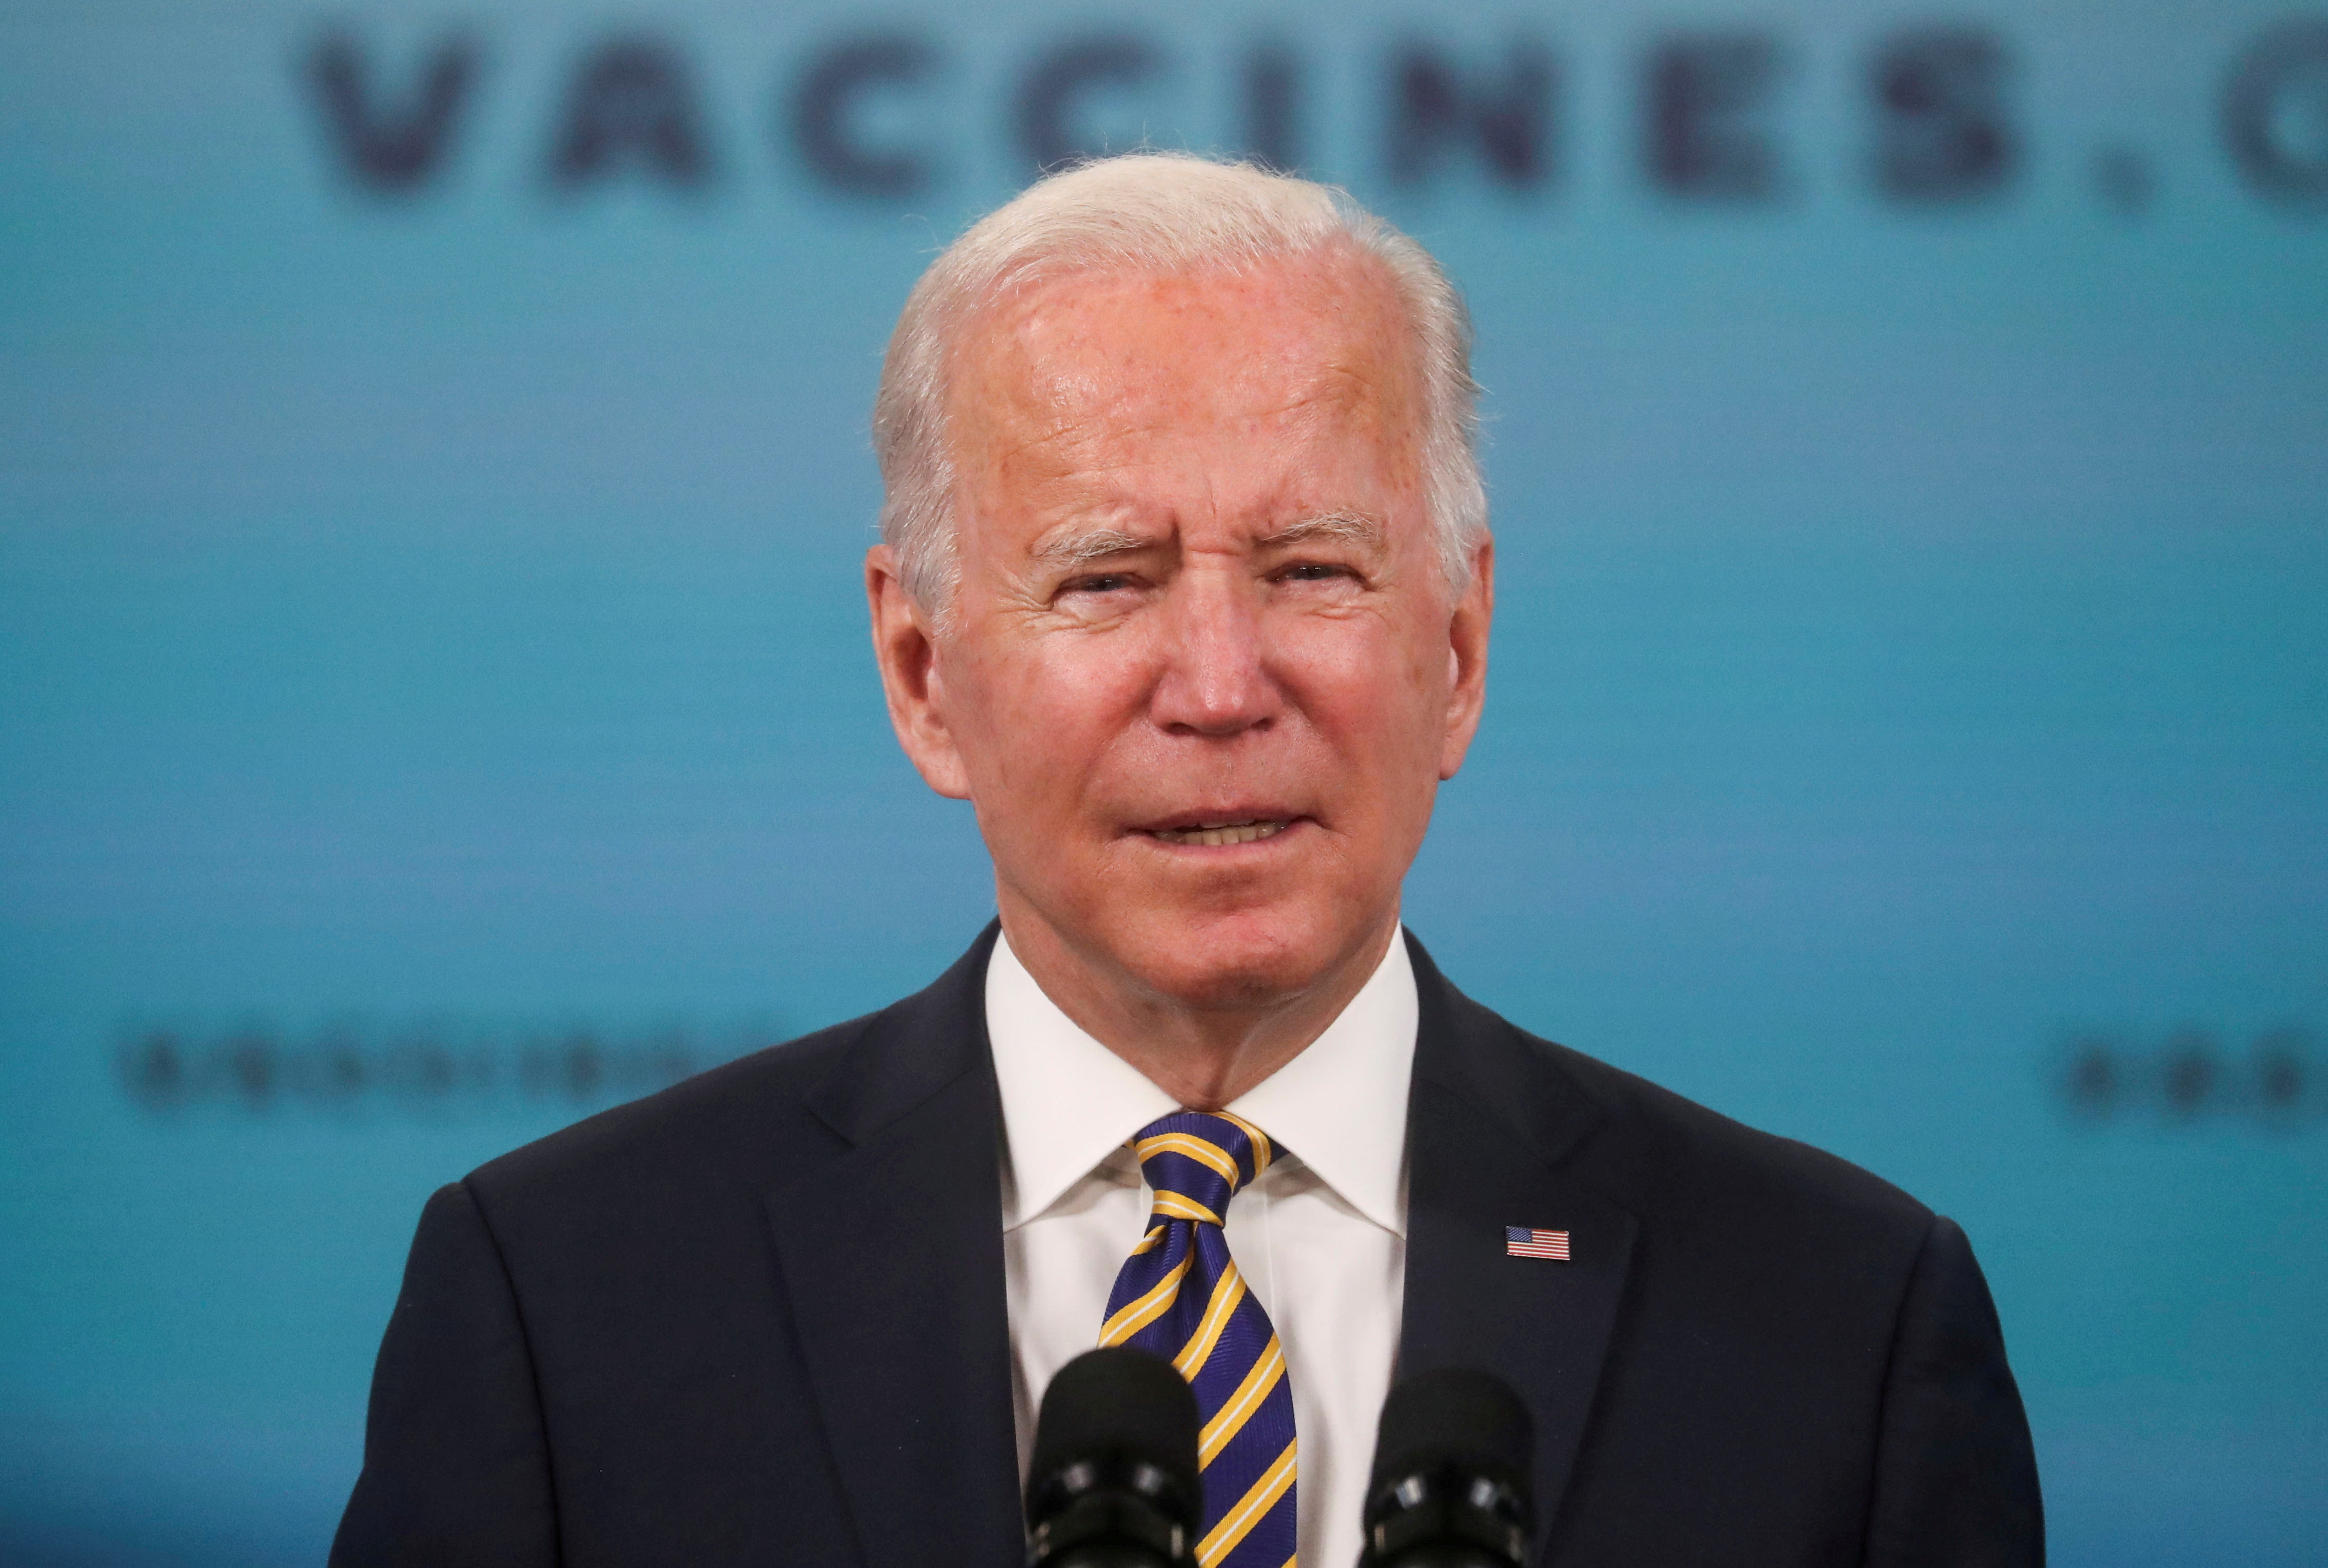 U.S. President Joe Biden delivers an update on the administration's coronavirus disease (COVID-19) response and the vaccination program during remarks at the White House in Washington, U.S., October 14, 2021. REUTERS/Leah Millis/File Photo